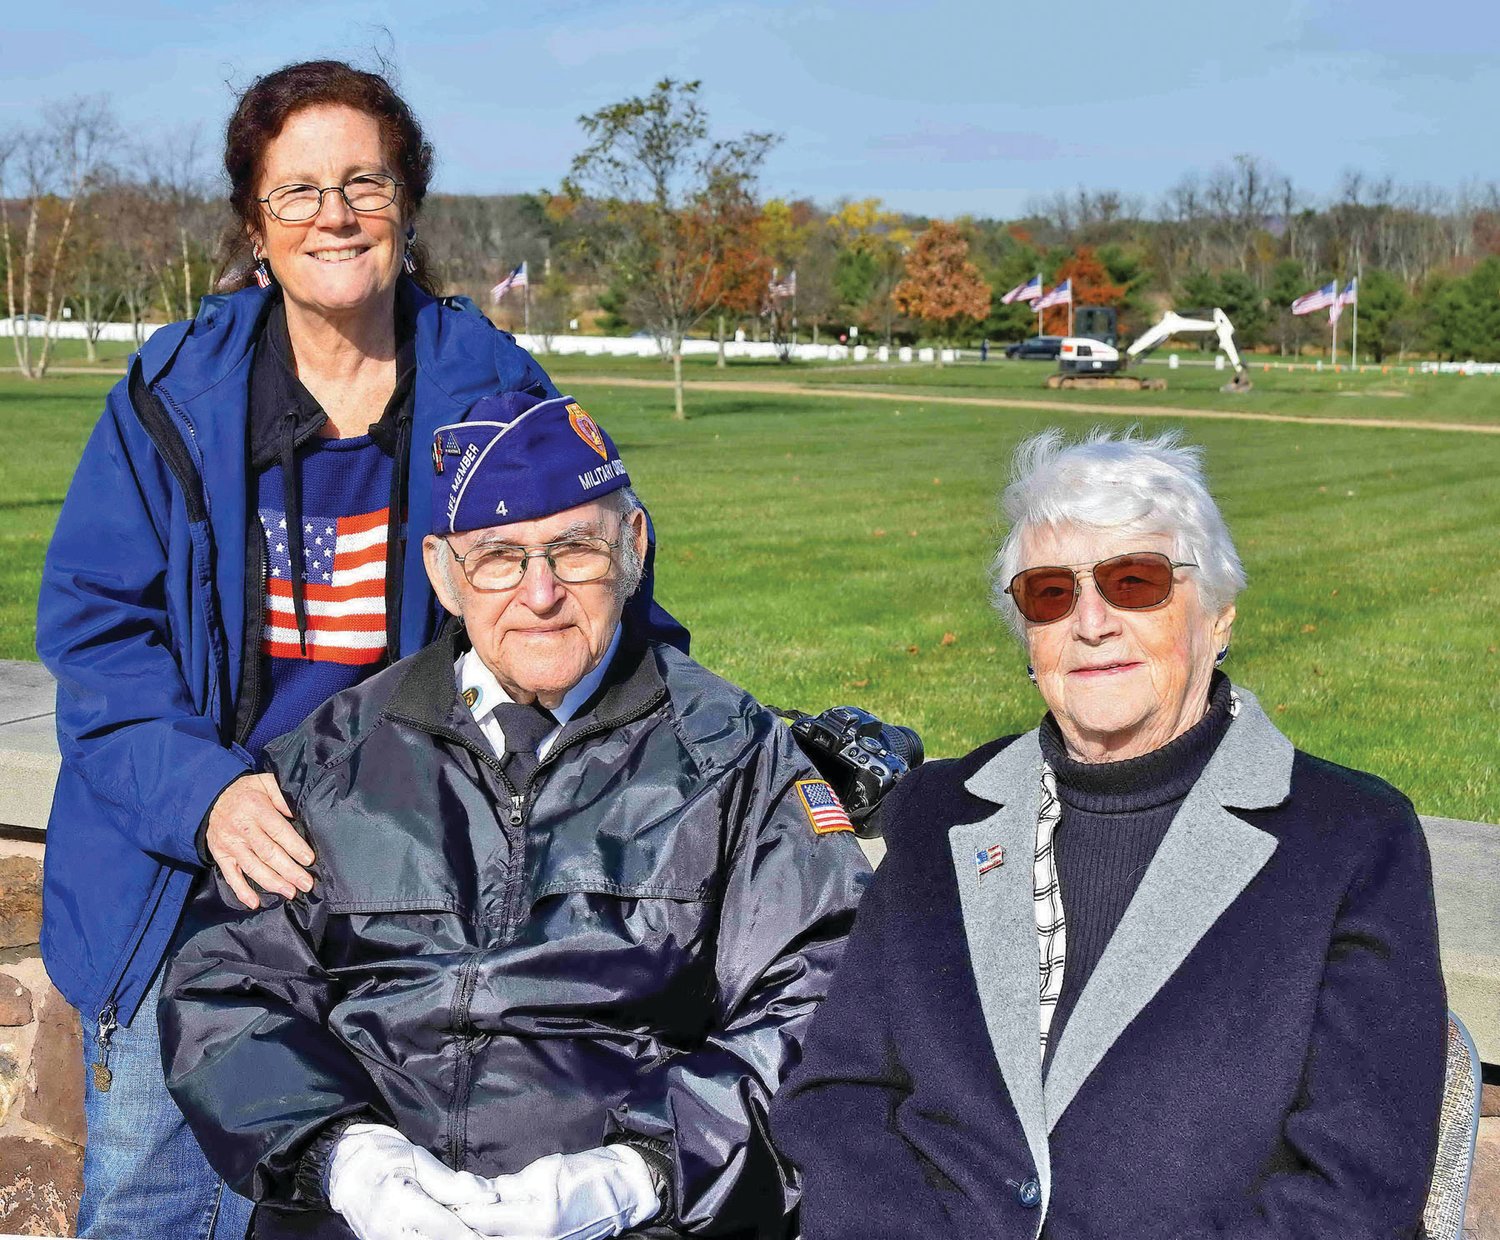 World War II veteran Salvador Castro, 96, the oldet veteran at the cemetery, with wife Eleanor and daughter Nora Doan.